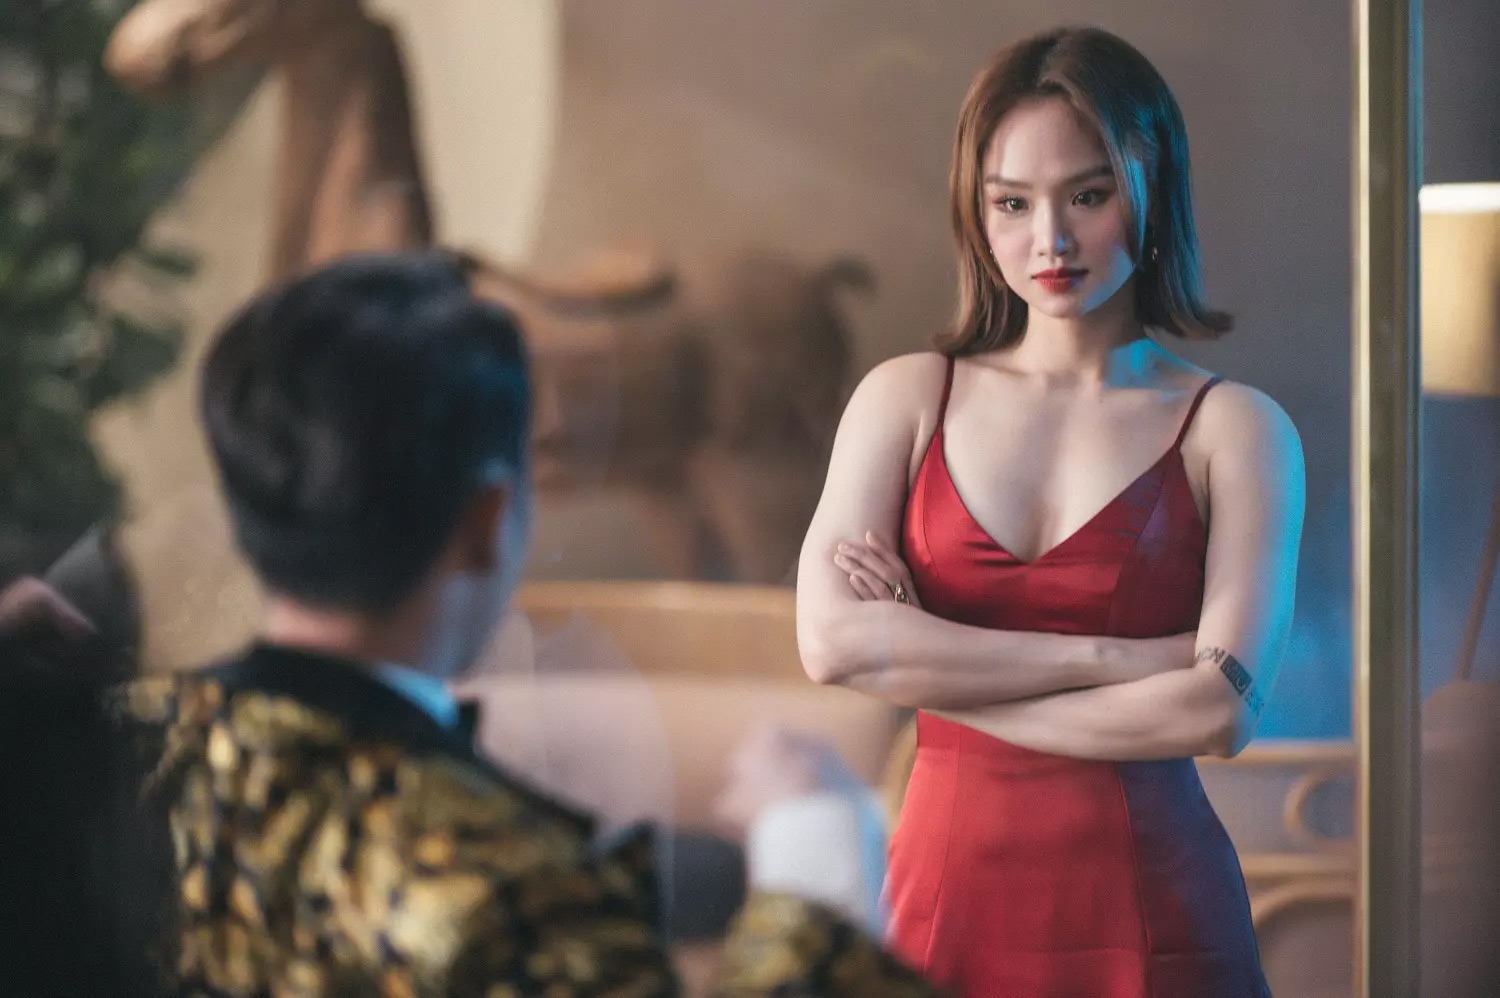 Wearing a sexy dress to chase her old love, Miu Le herself realized the biggest flaw in her appearance - 1